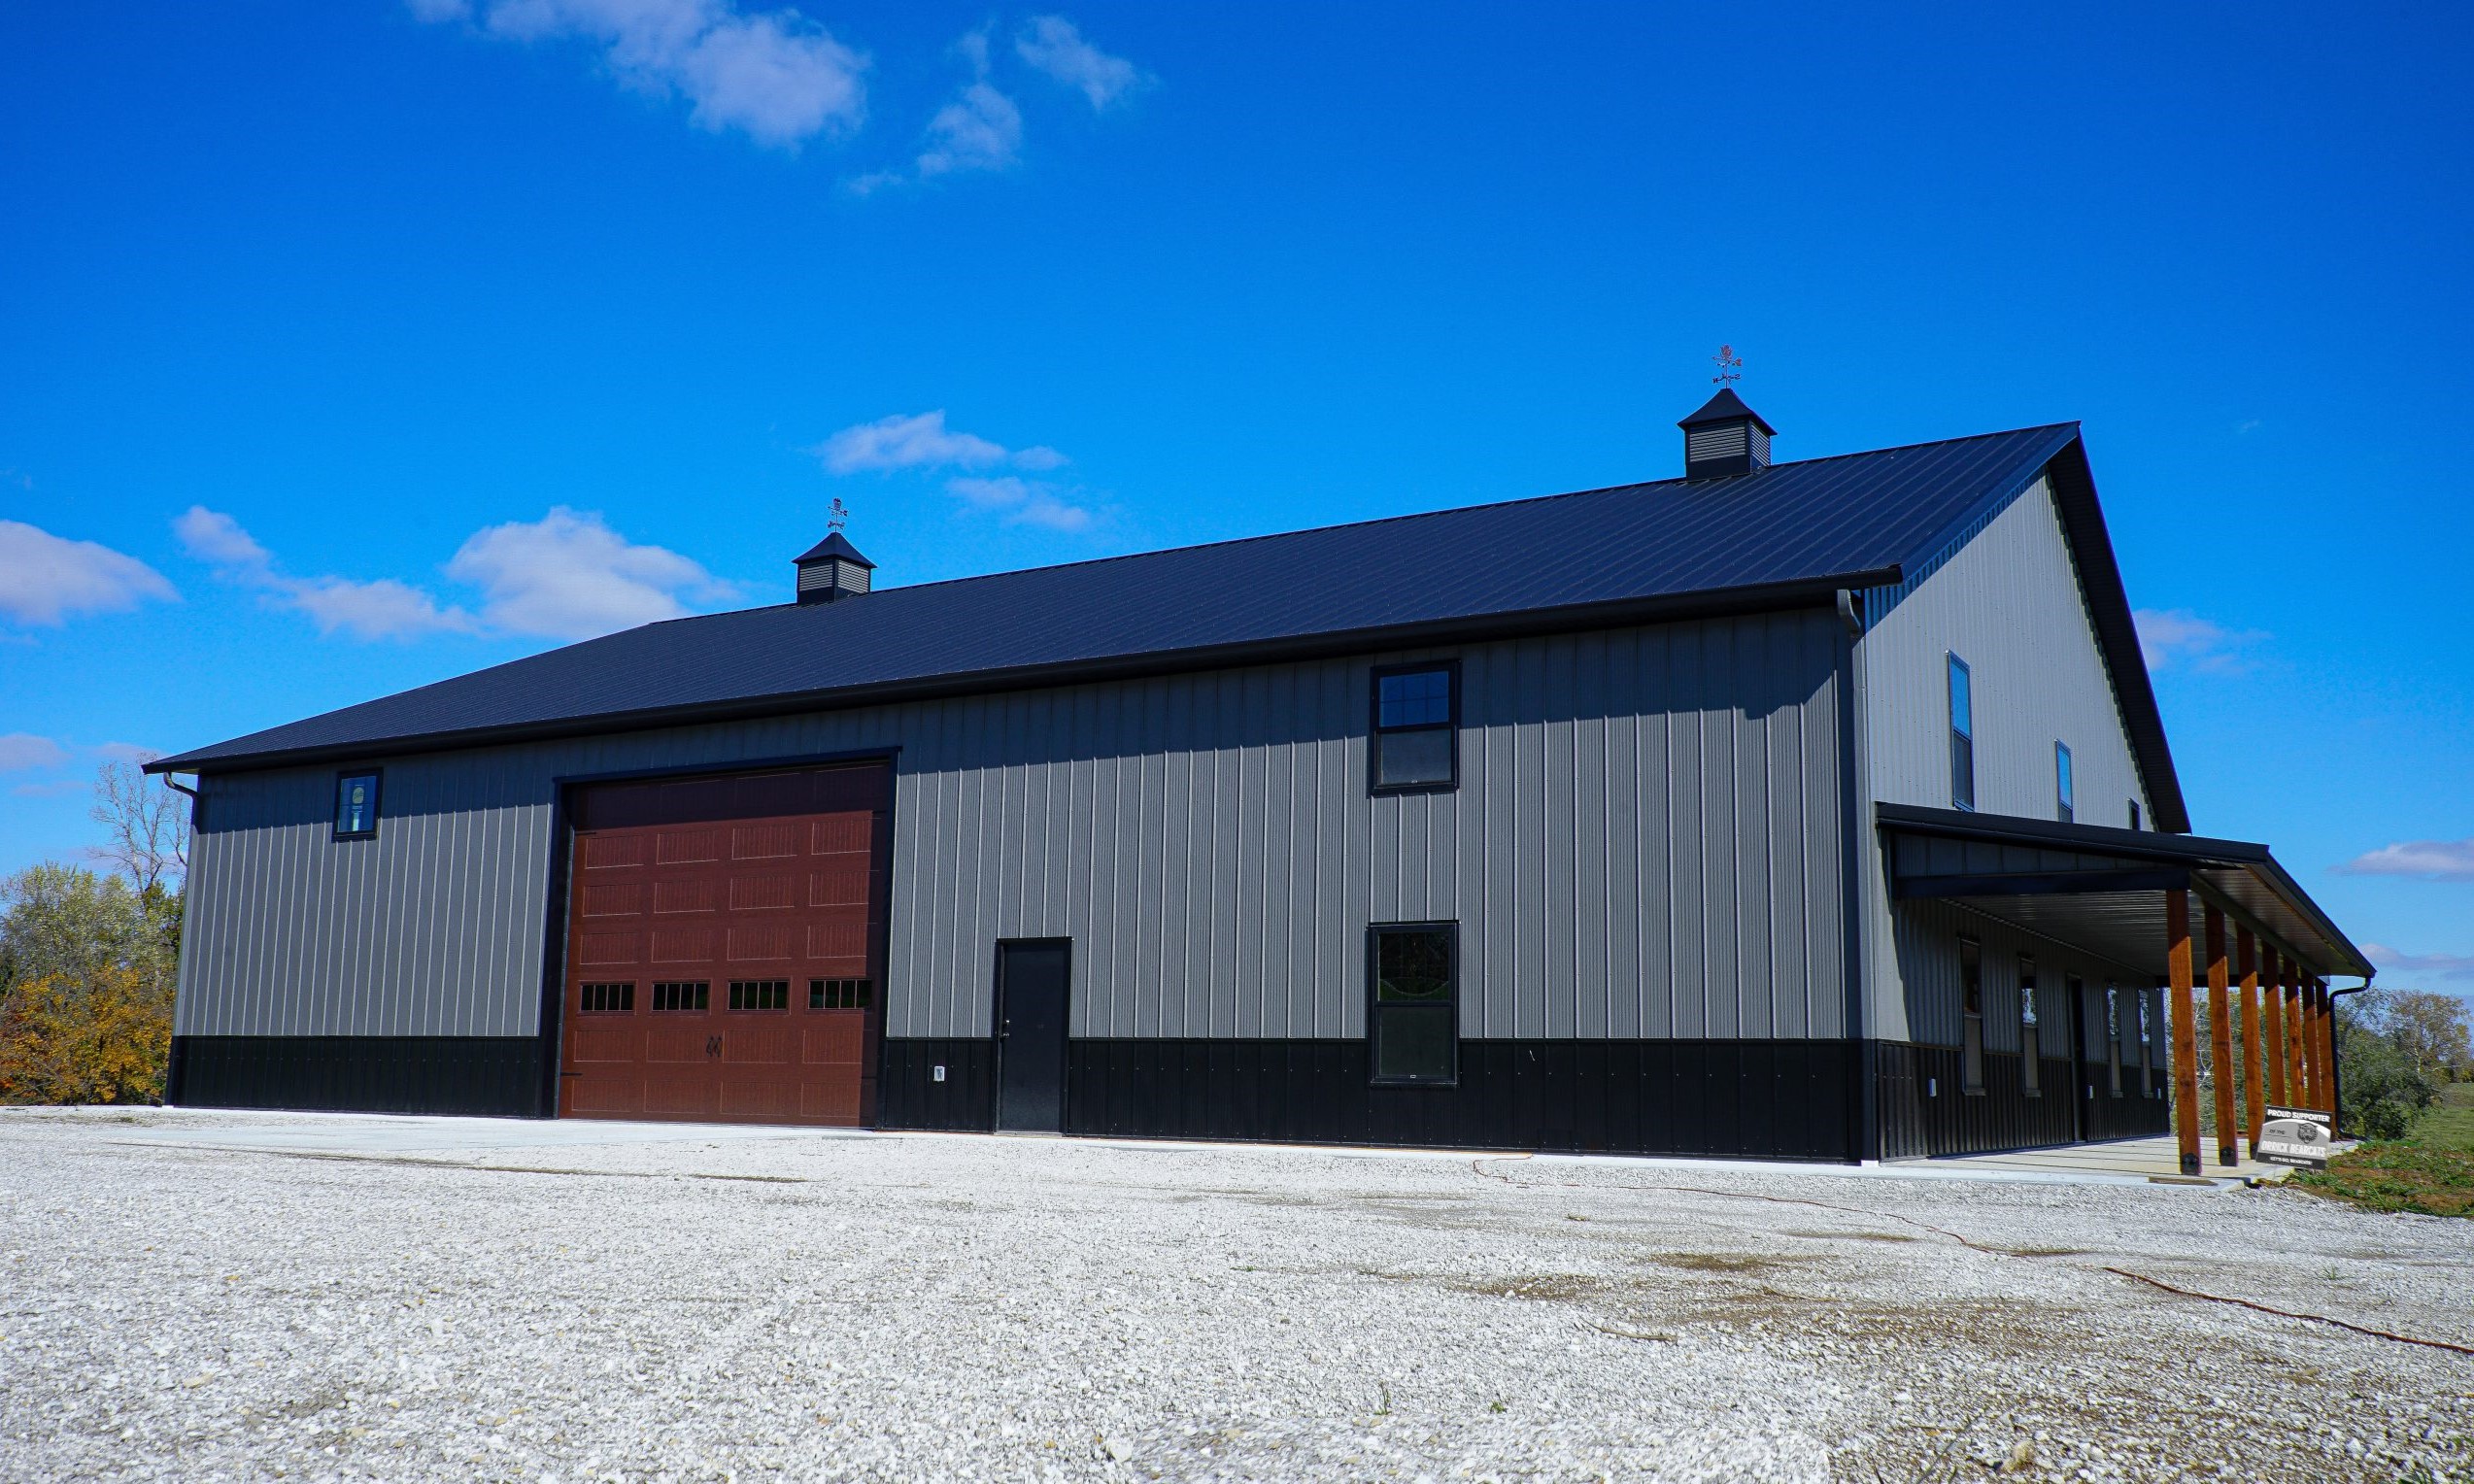 event center with grey siding and black roof